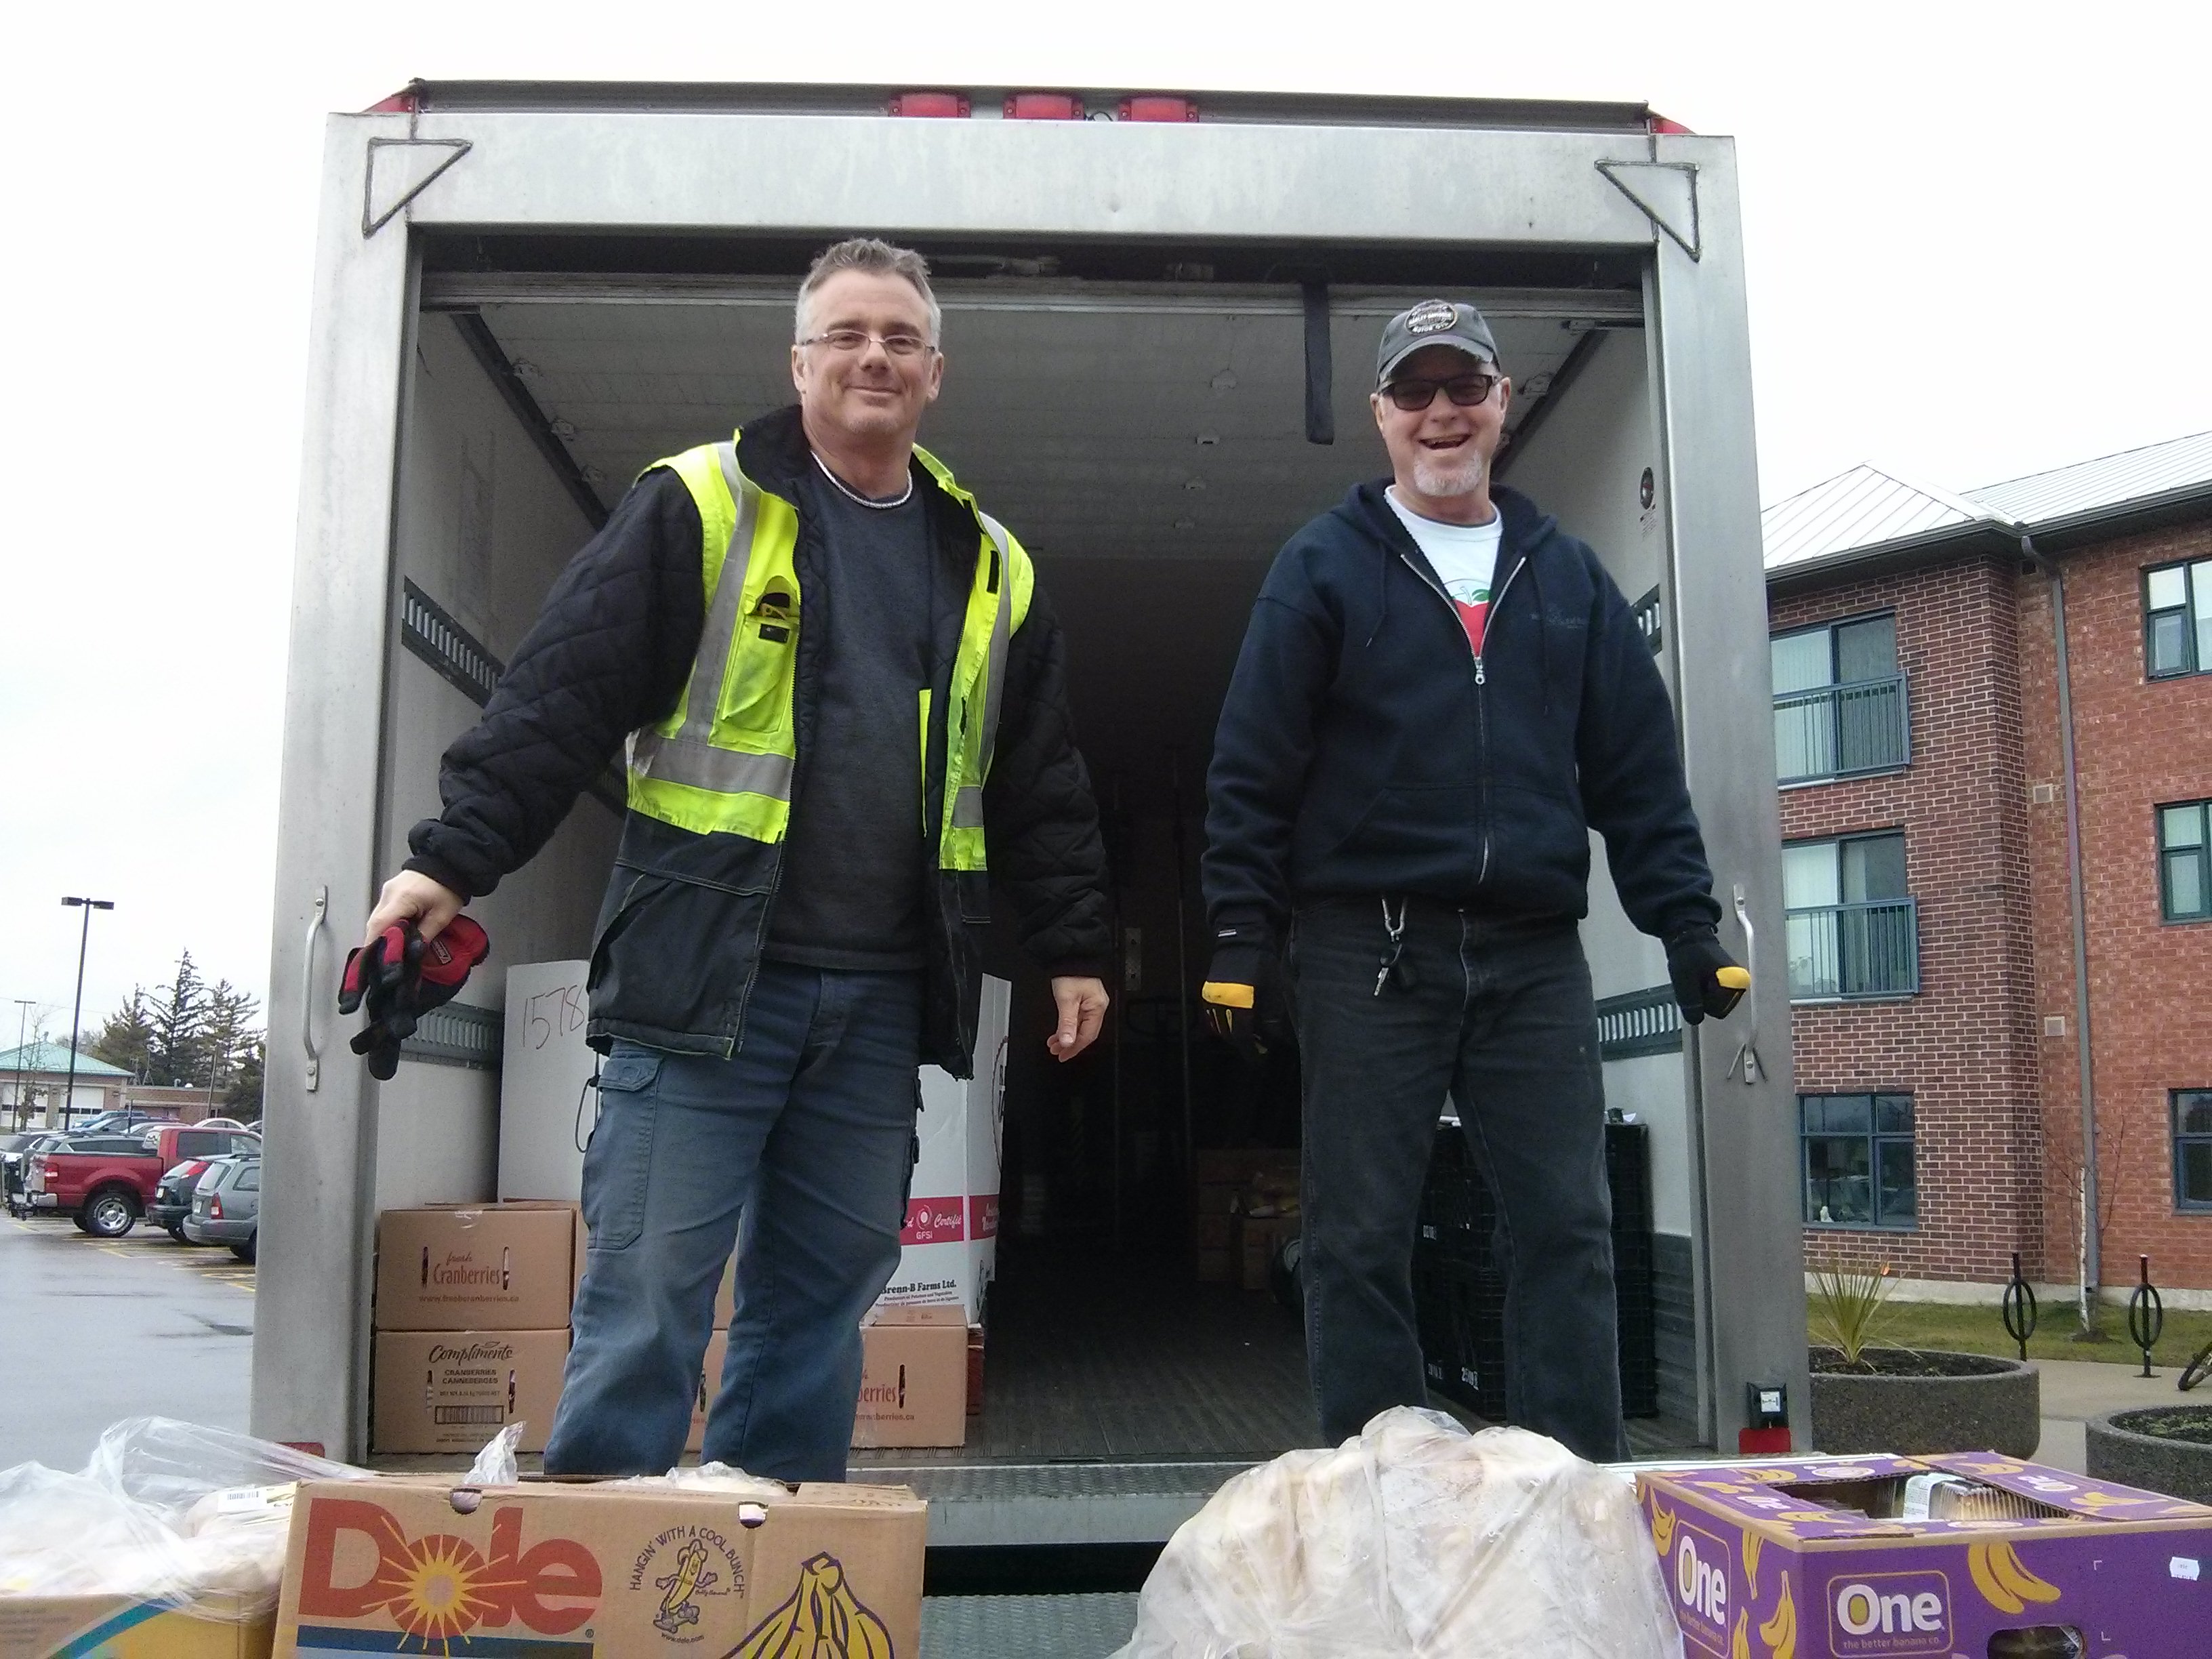 FFL Driver, Ron Hiegelsberger, and Volunteer Assistant Driver, Tom Gallinger - on the road delivering food to those in need every day